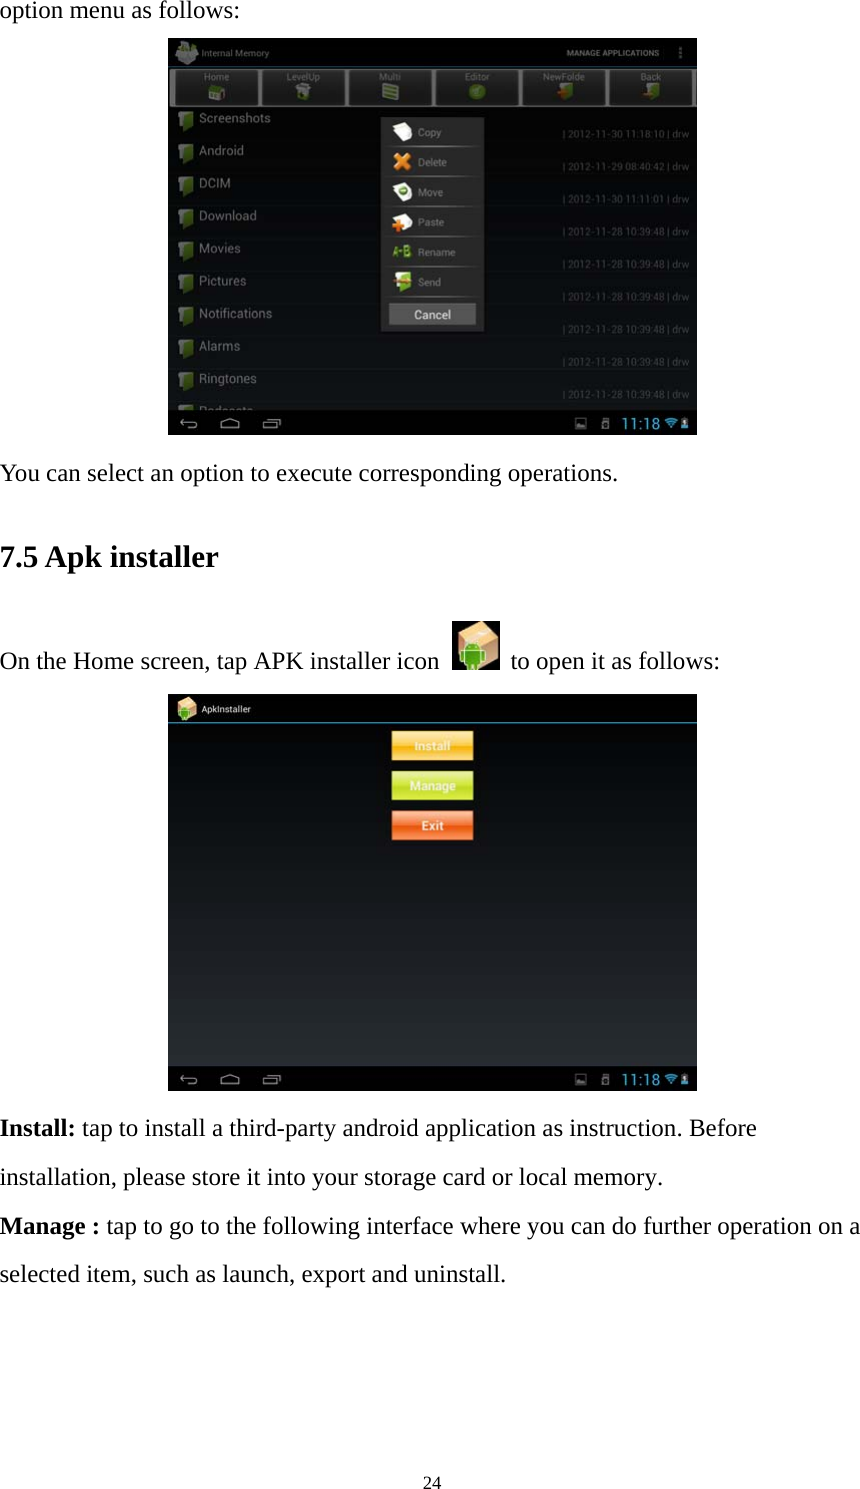 24 option menu as follows:  You can select an option to execute corresponding operations.   7.5 Apk installer   On the Home screen, tap APK installer icon   to open it as follows:  Install: tap to install a third-party android application as instruction. Before installation, please store it into your storage card or local memory. Manage : tap to go to the following interface where you can do further operation on a selected item, such as launch, export and uninstall.   